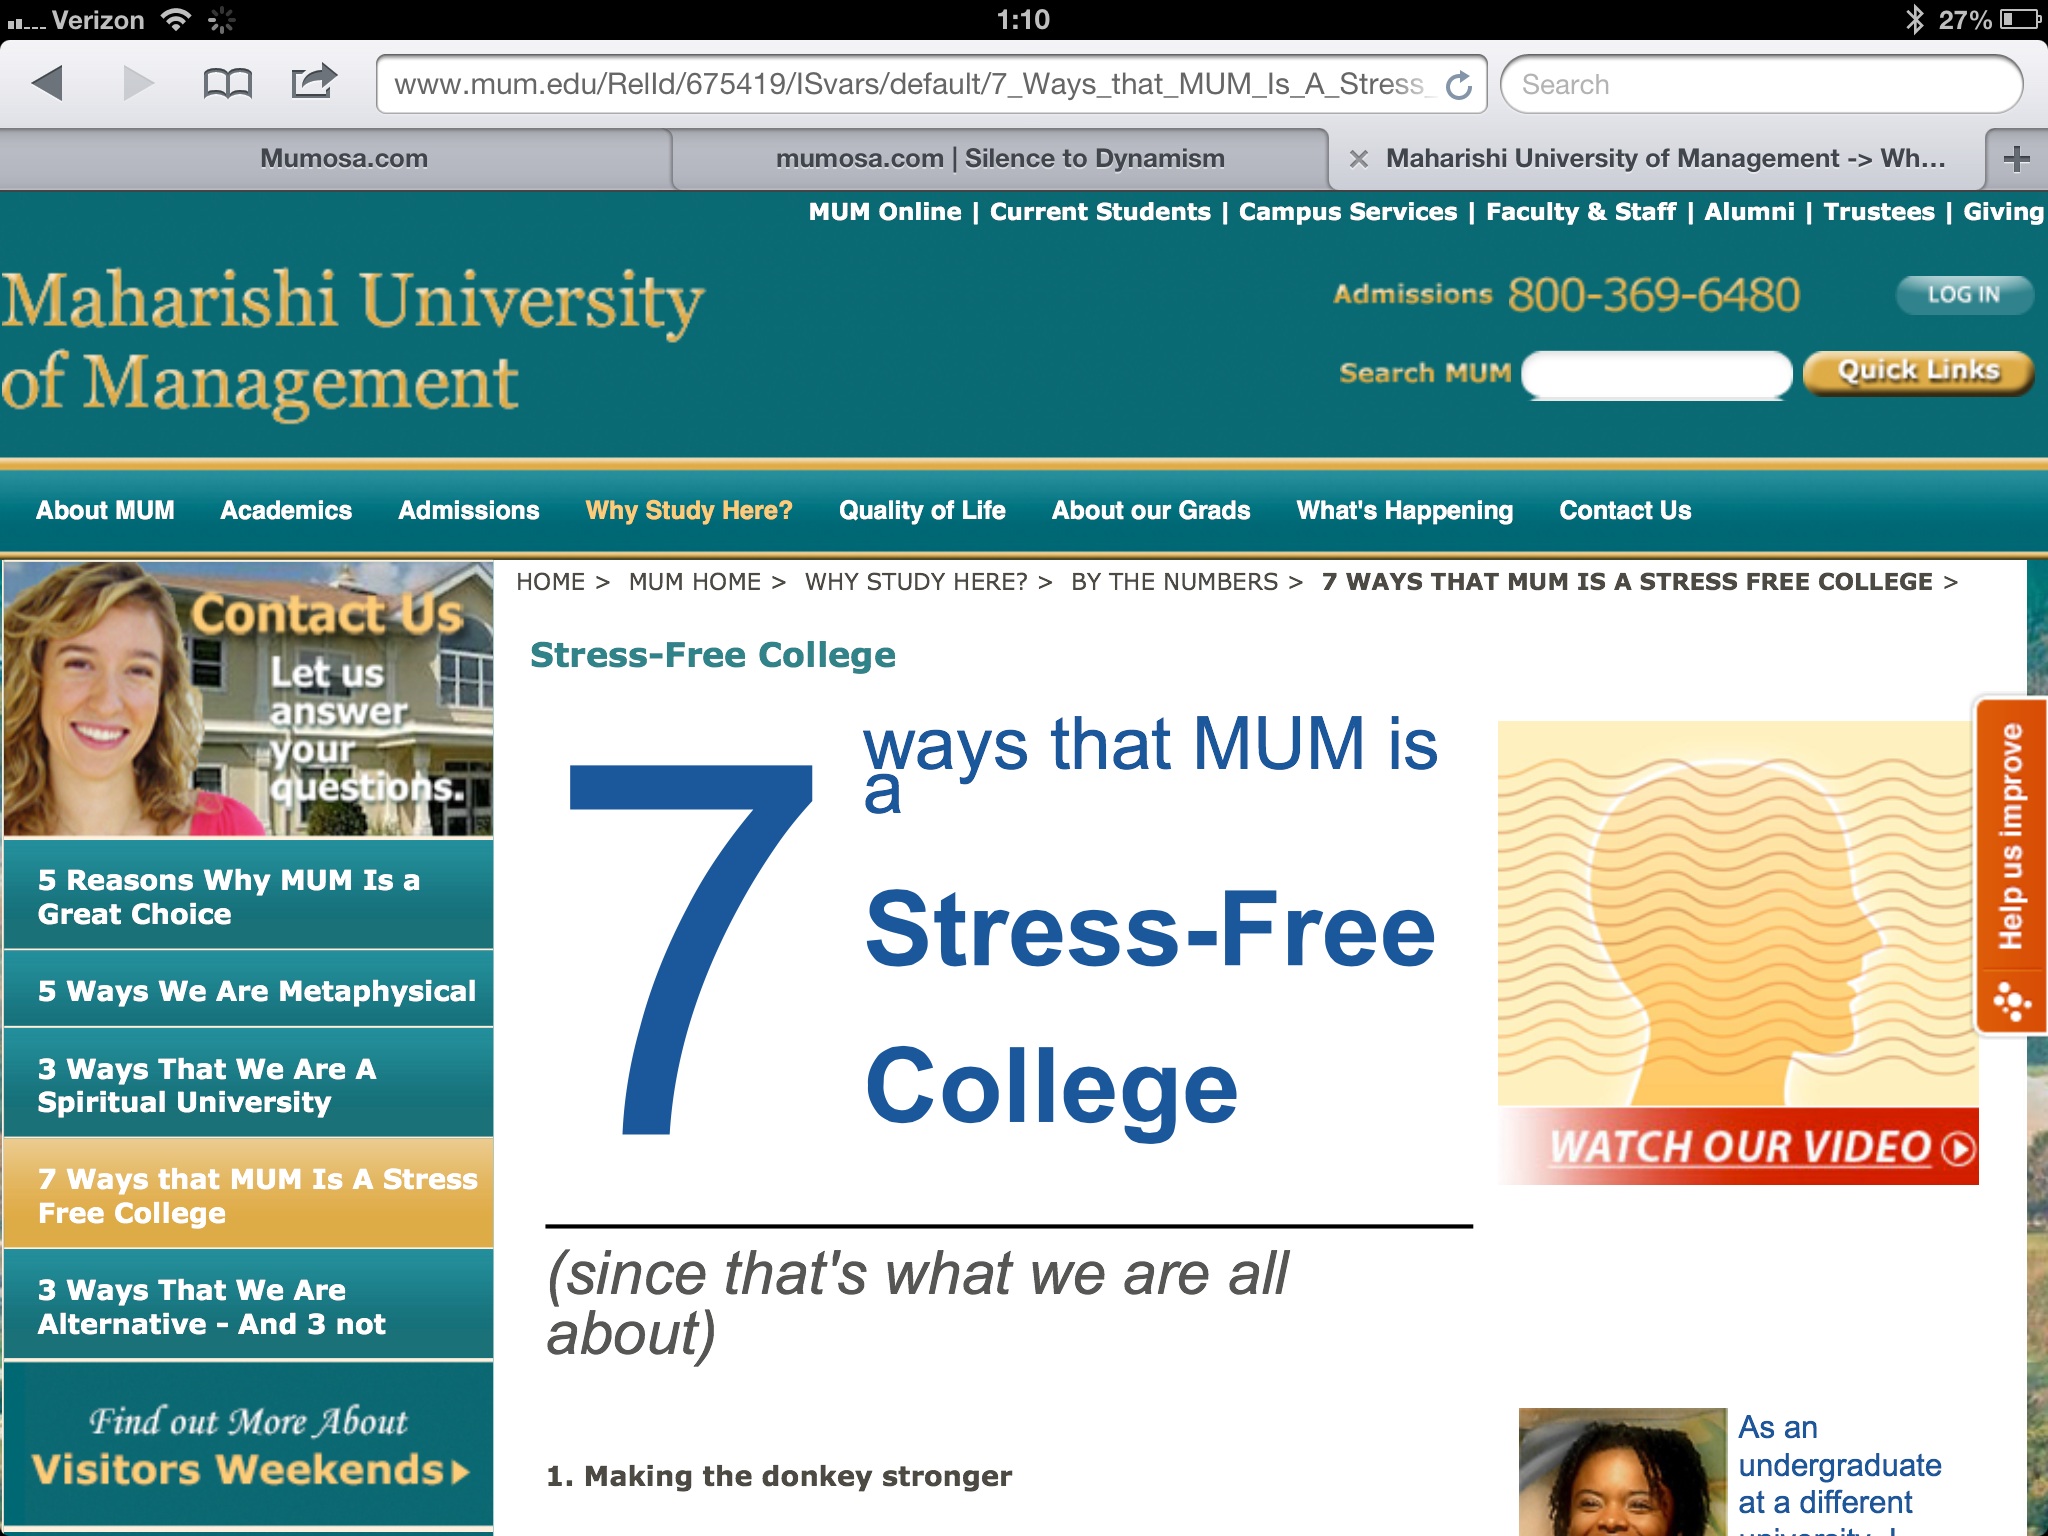 Seven ways MUM is a stress free college